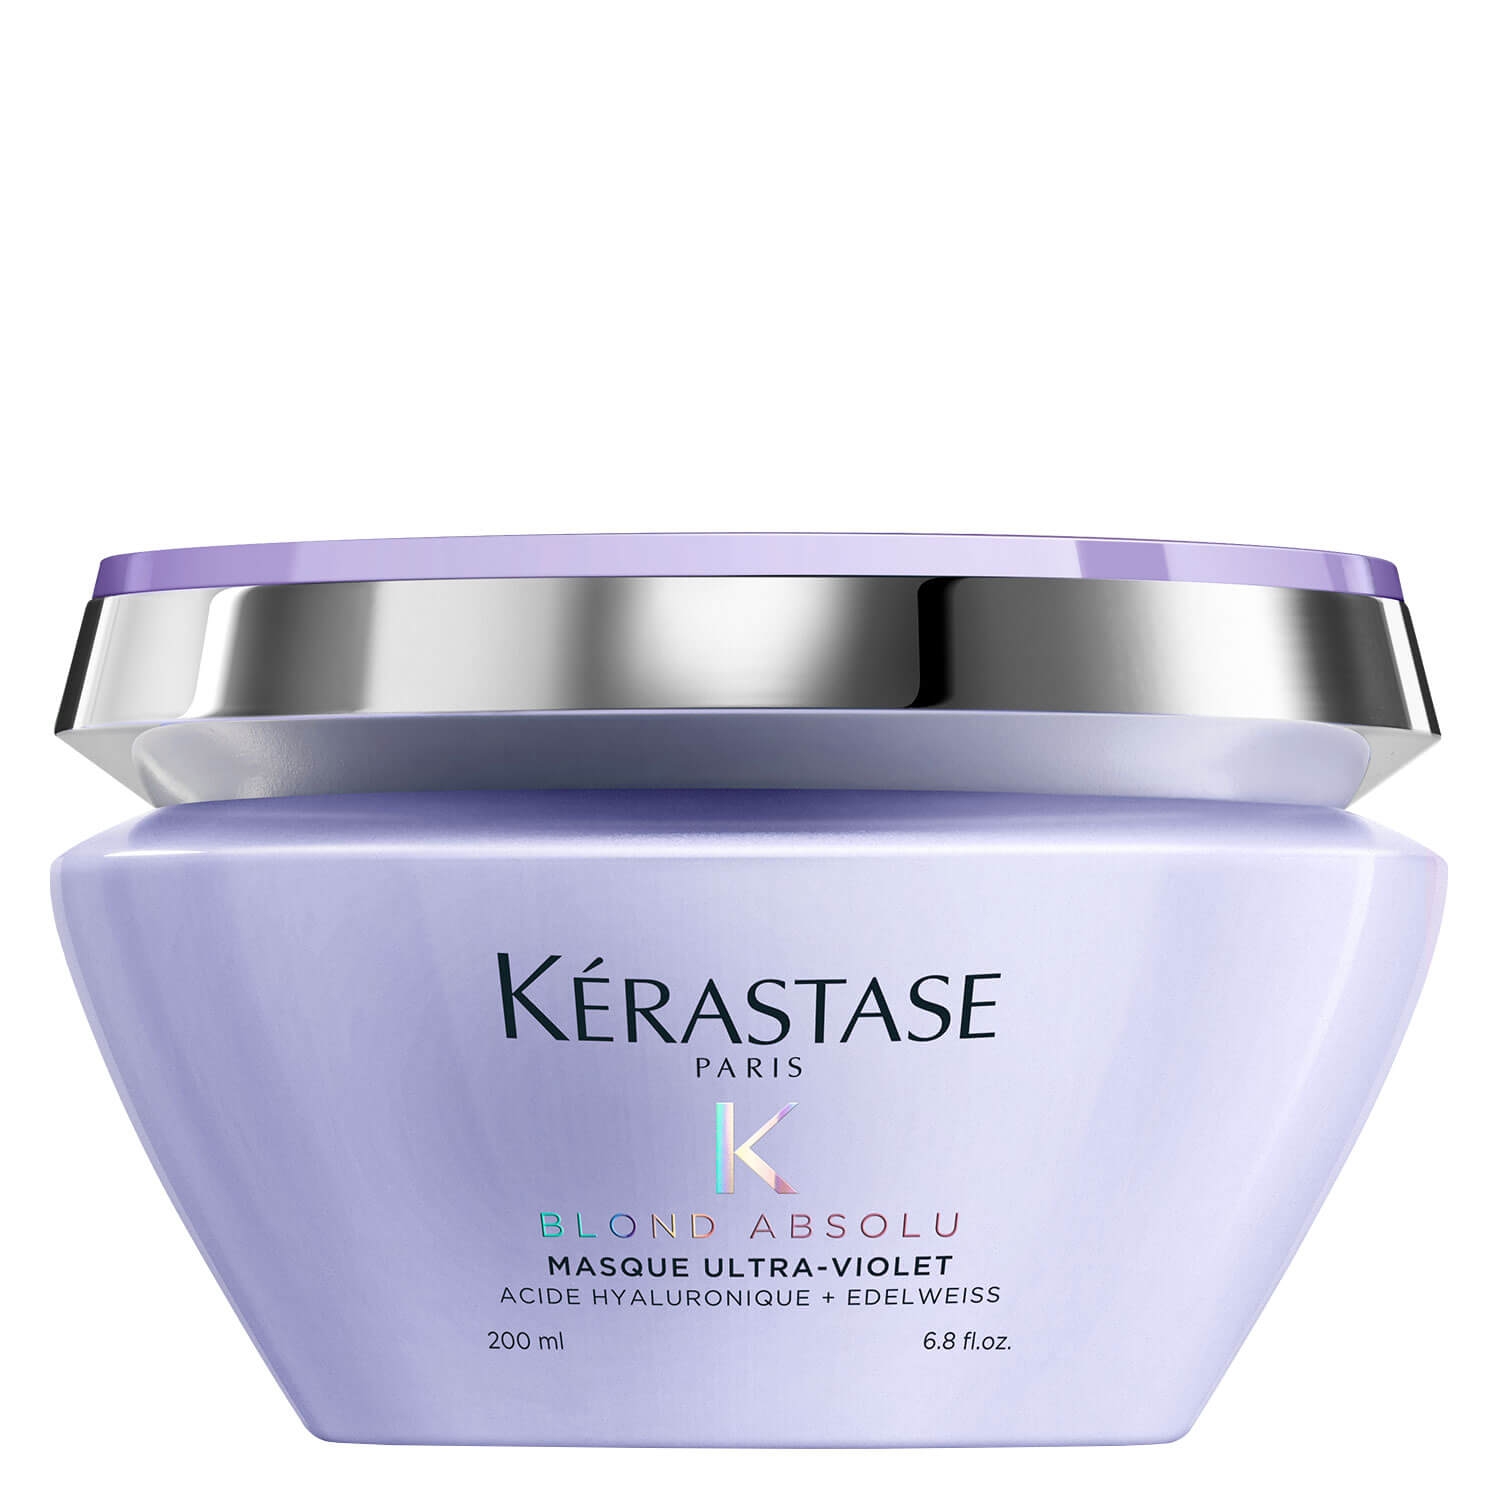 Product image from Blond Absolu - Masque Ultra-Violet